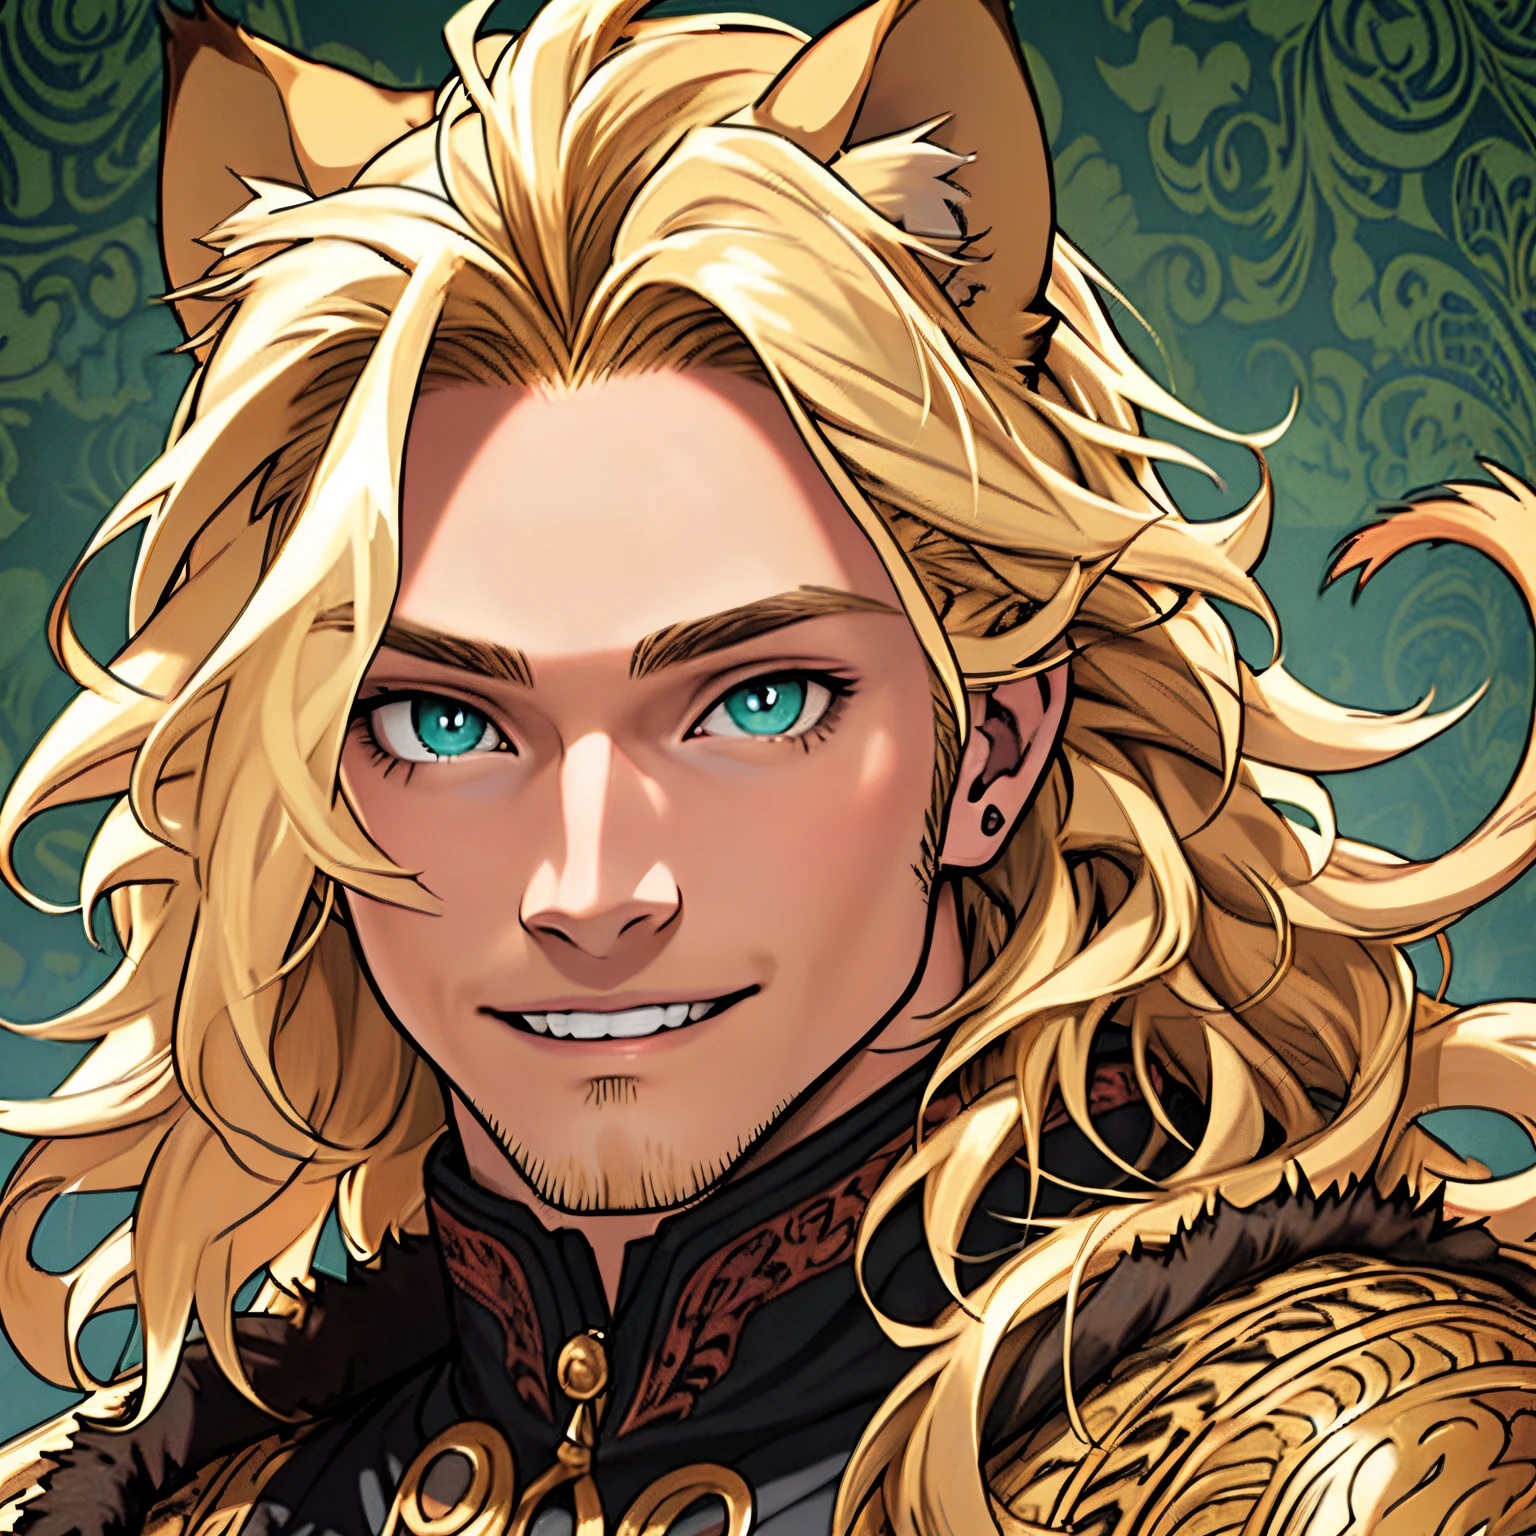 Fur coat, One male, lion ears, long hair, blond, blond hair, green eyes, tall, muscular, beautiful face, highest quality, masterpiece, 3d, anime, perfect face, highest detail, feline eyes, short facial hair, lion tail, wavy hair, bust shot, detailed face, intricate details, paisley background, smile, solo, close up